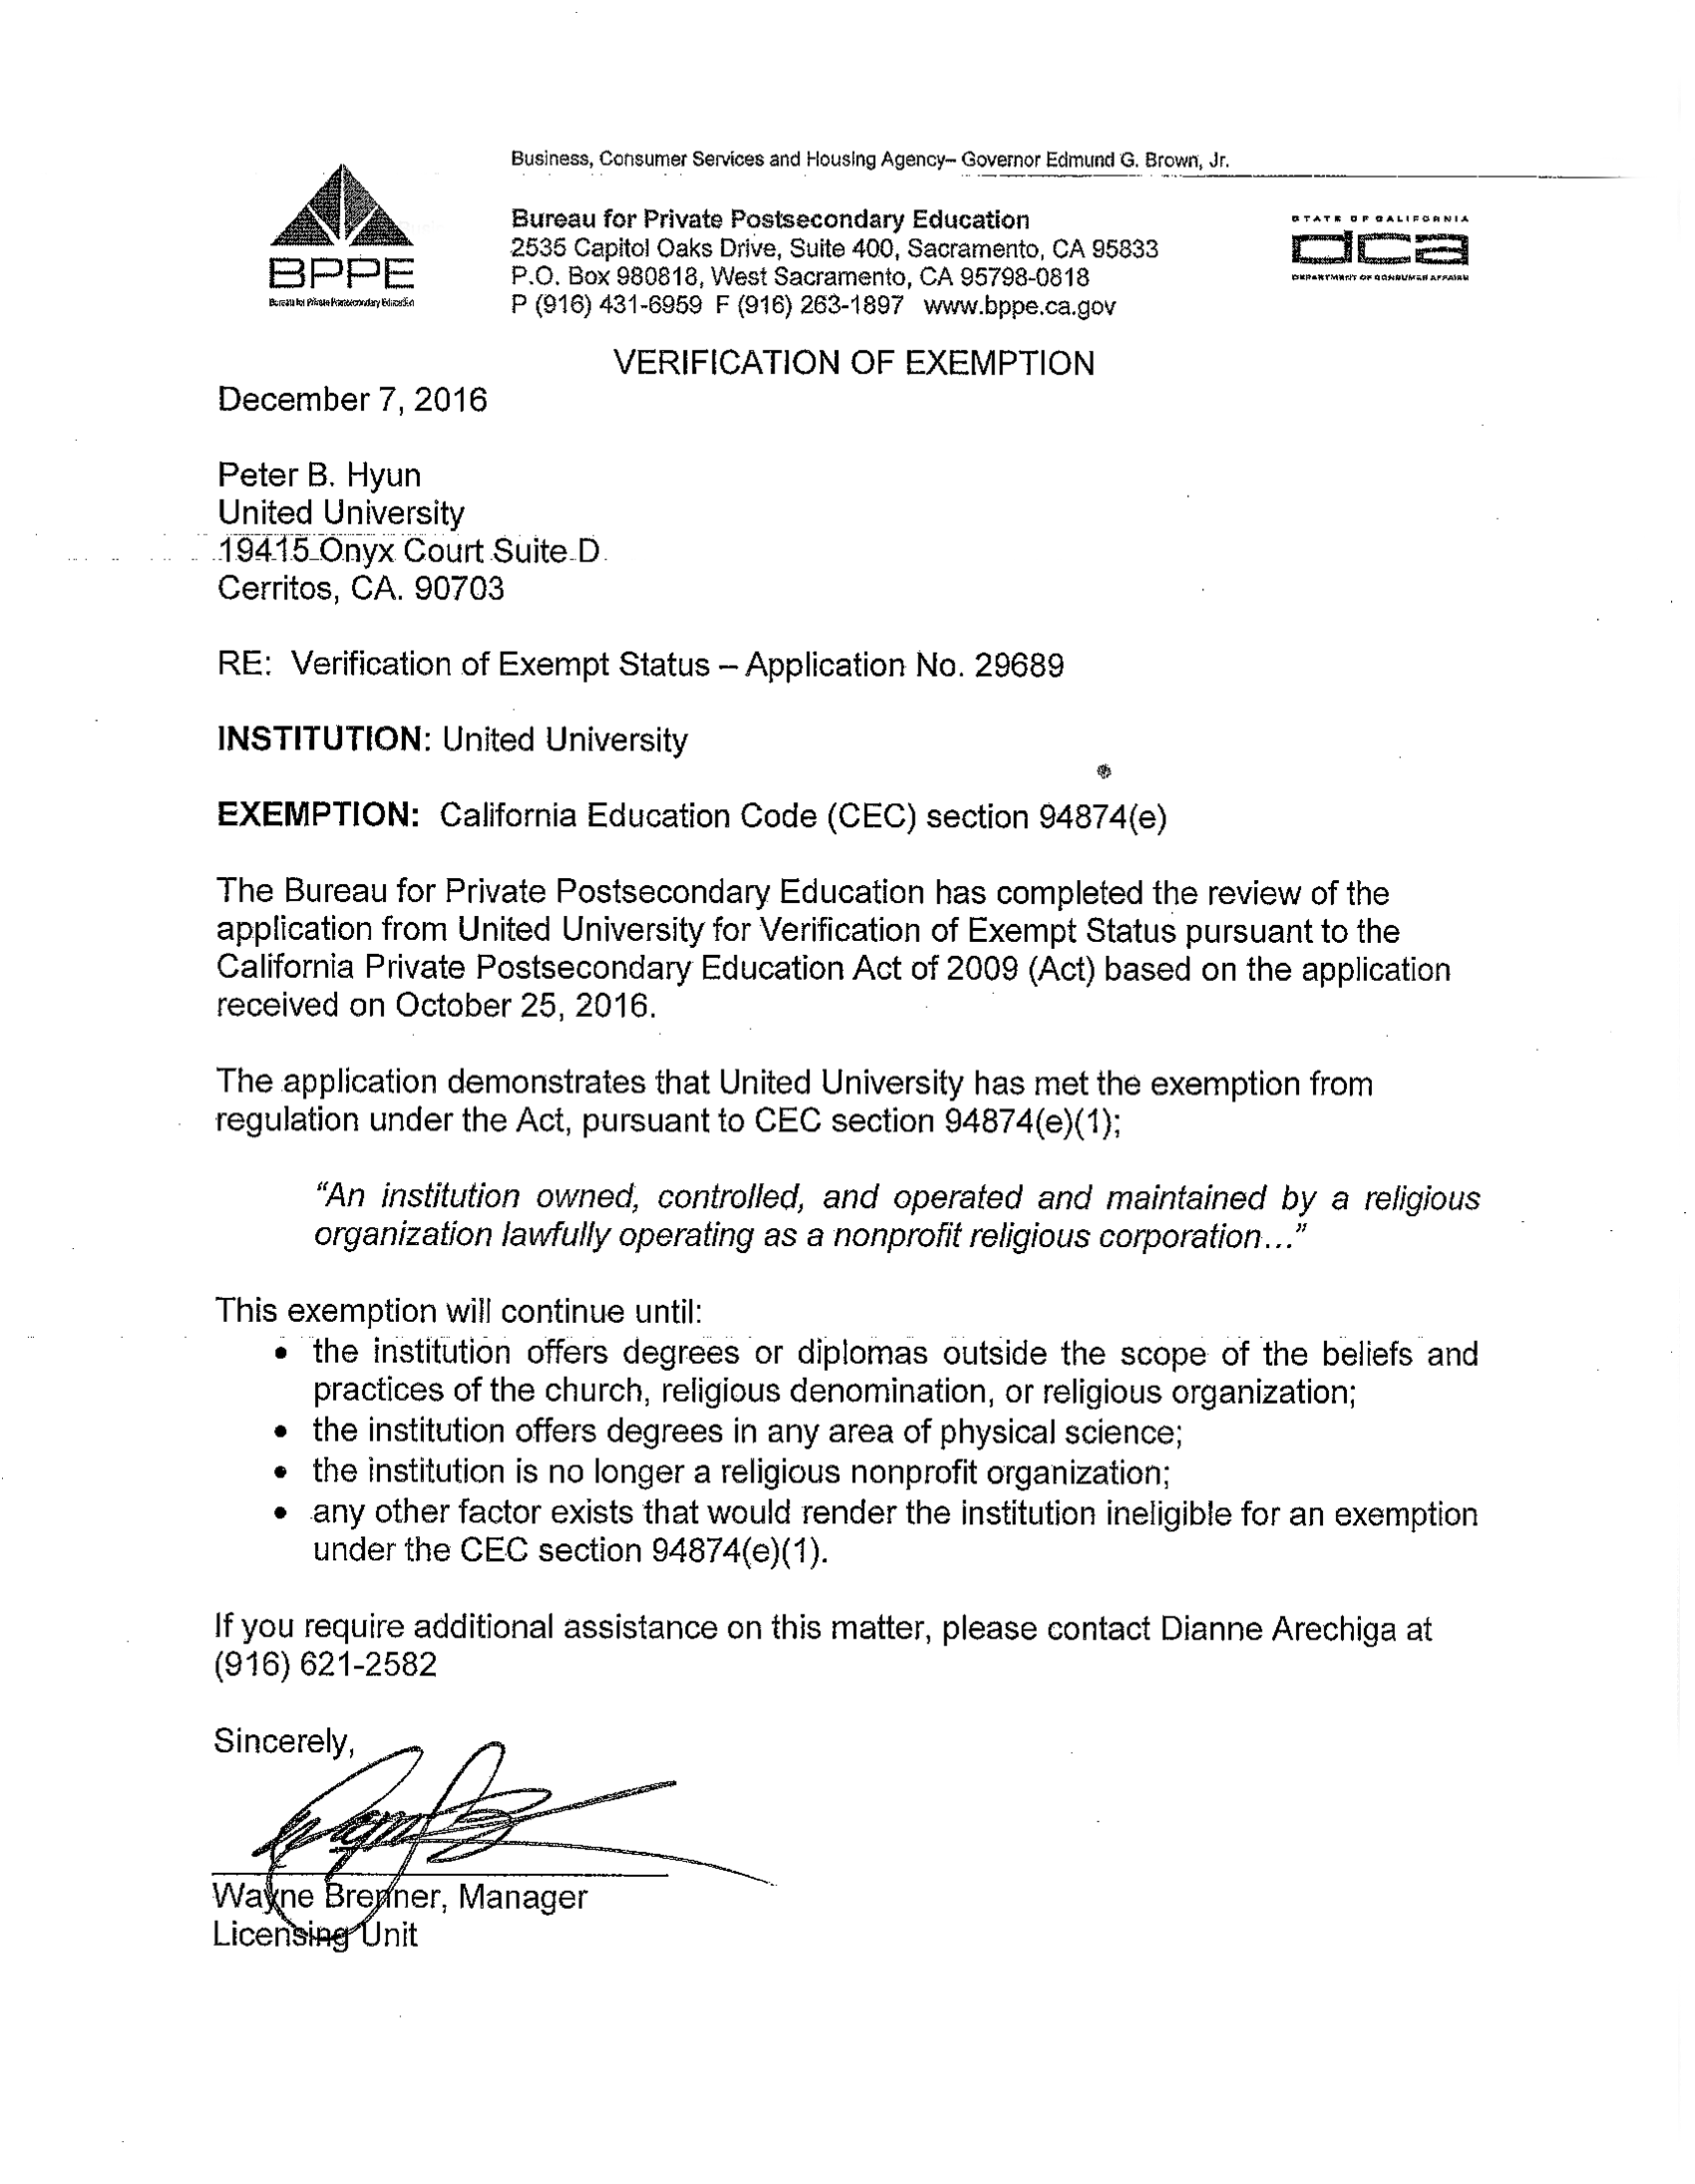 United-University-signed-approval--letter.gif